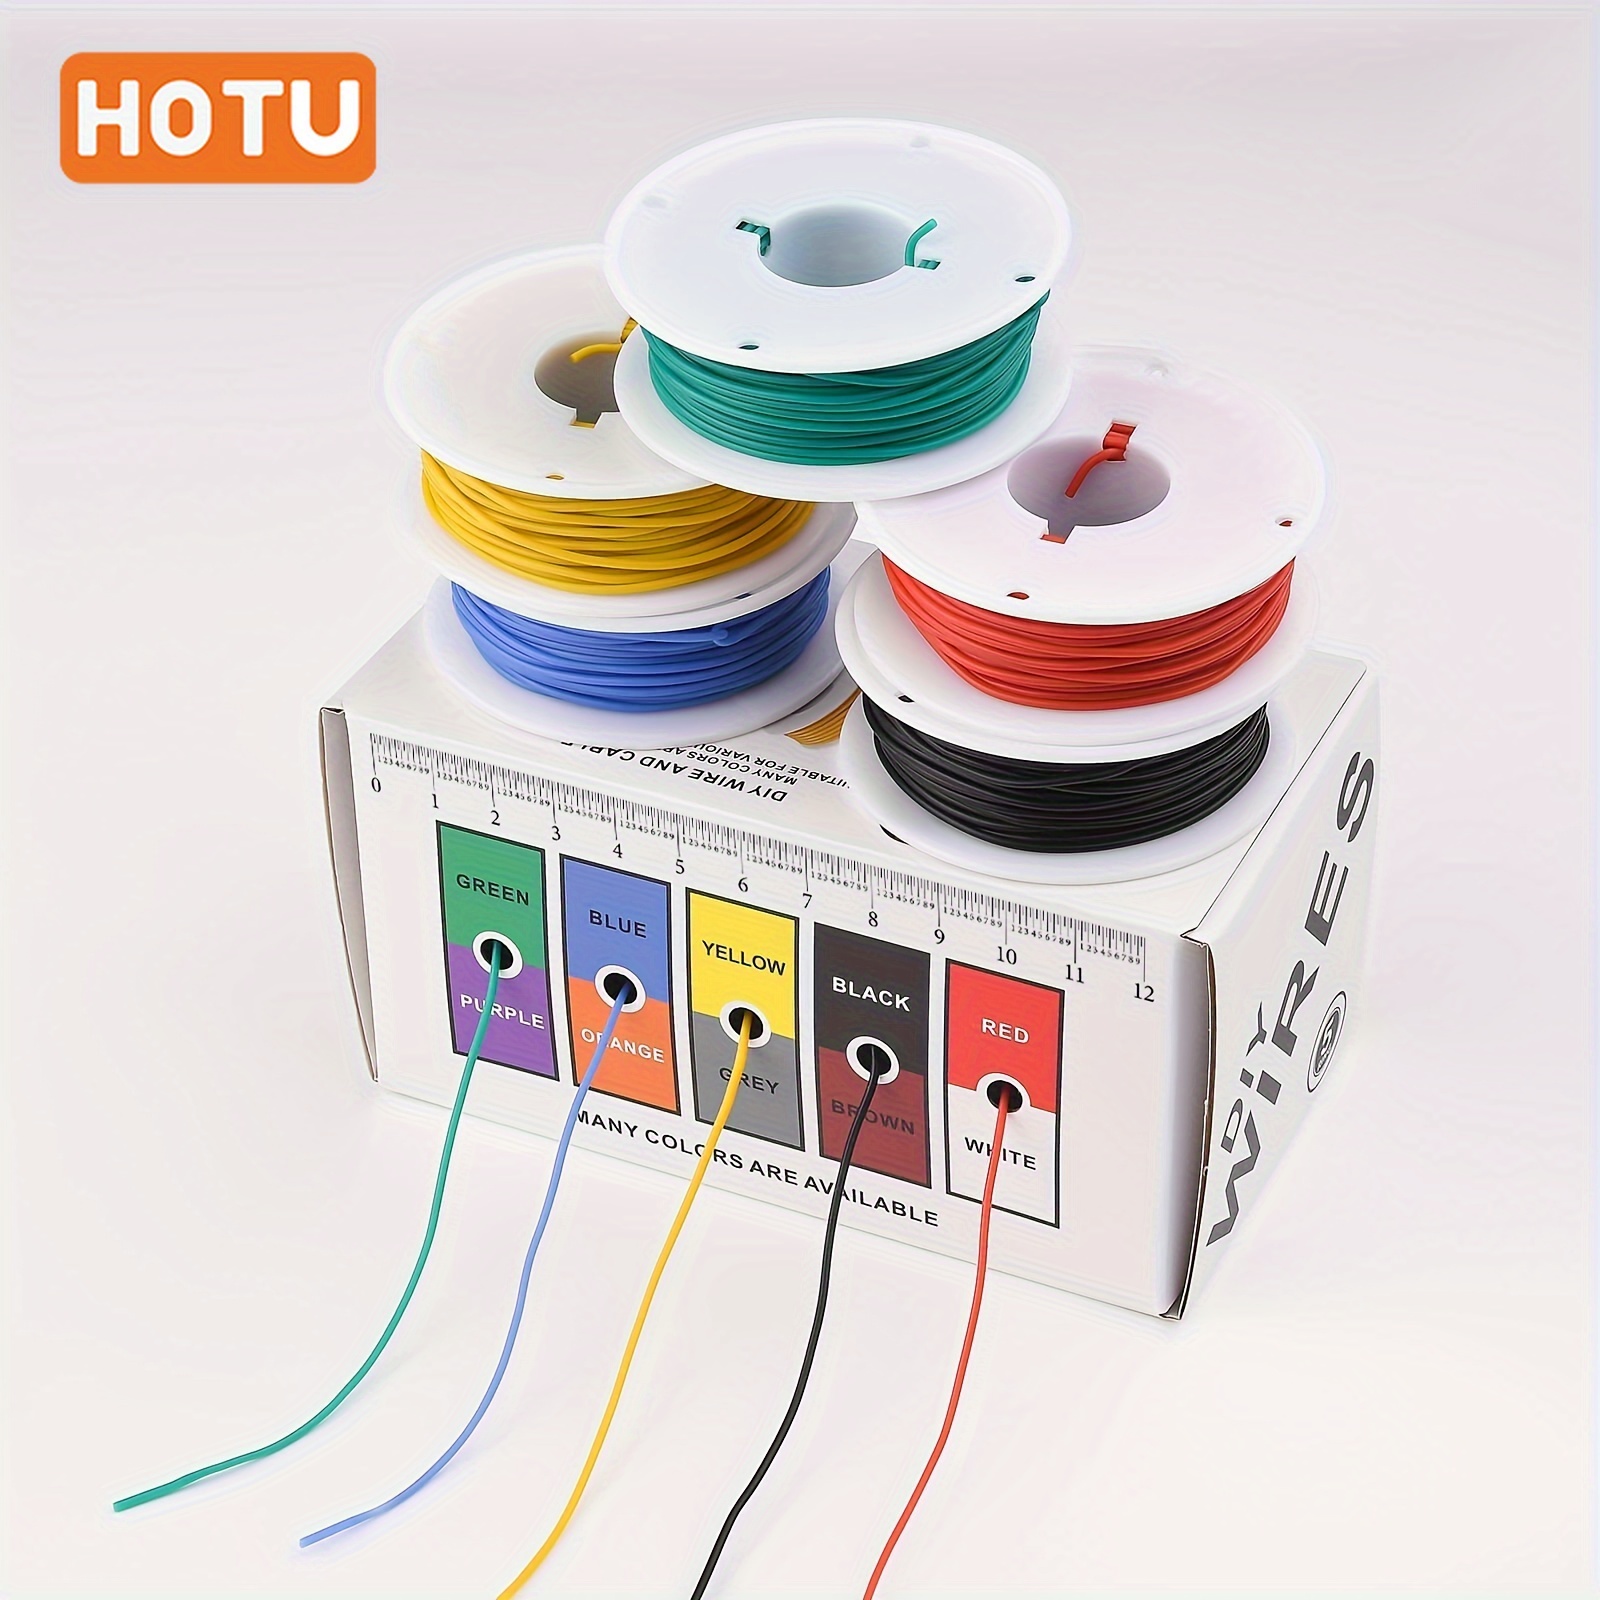 

Hotu 5-color Flexible Silicone Wire Kit - 30 Awg, Tinned Copper Stranded Wires In Red, Black, Yellow, Blue, Green - Extra Soft For Diy, Car & Home Projects, 164ft/328ft